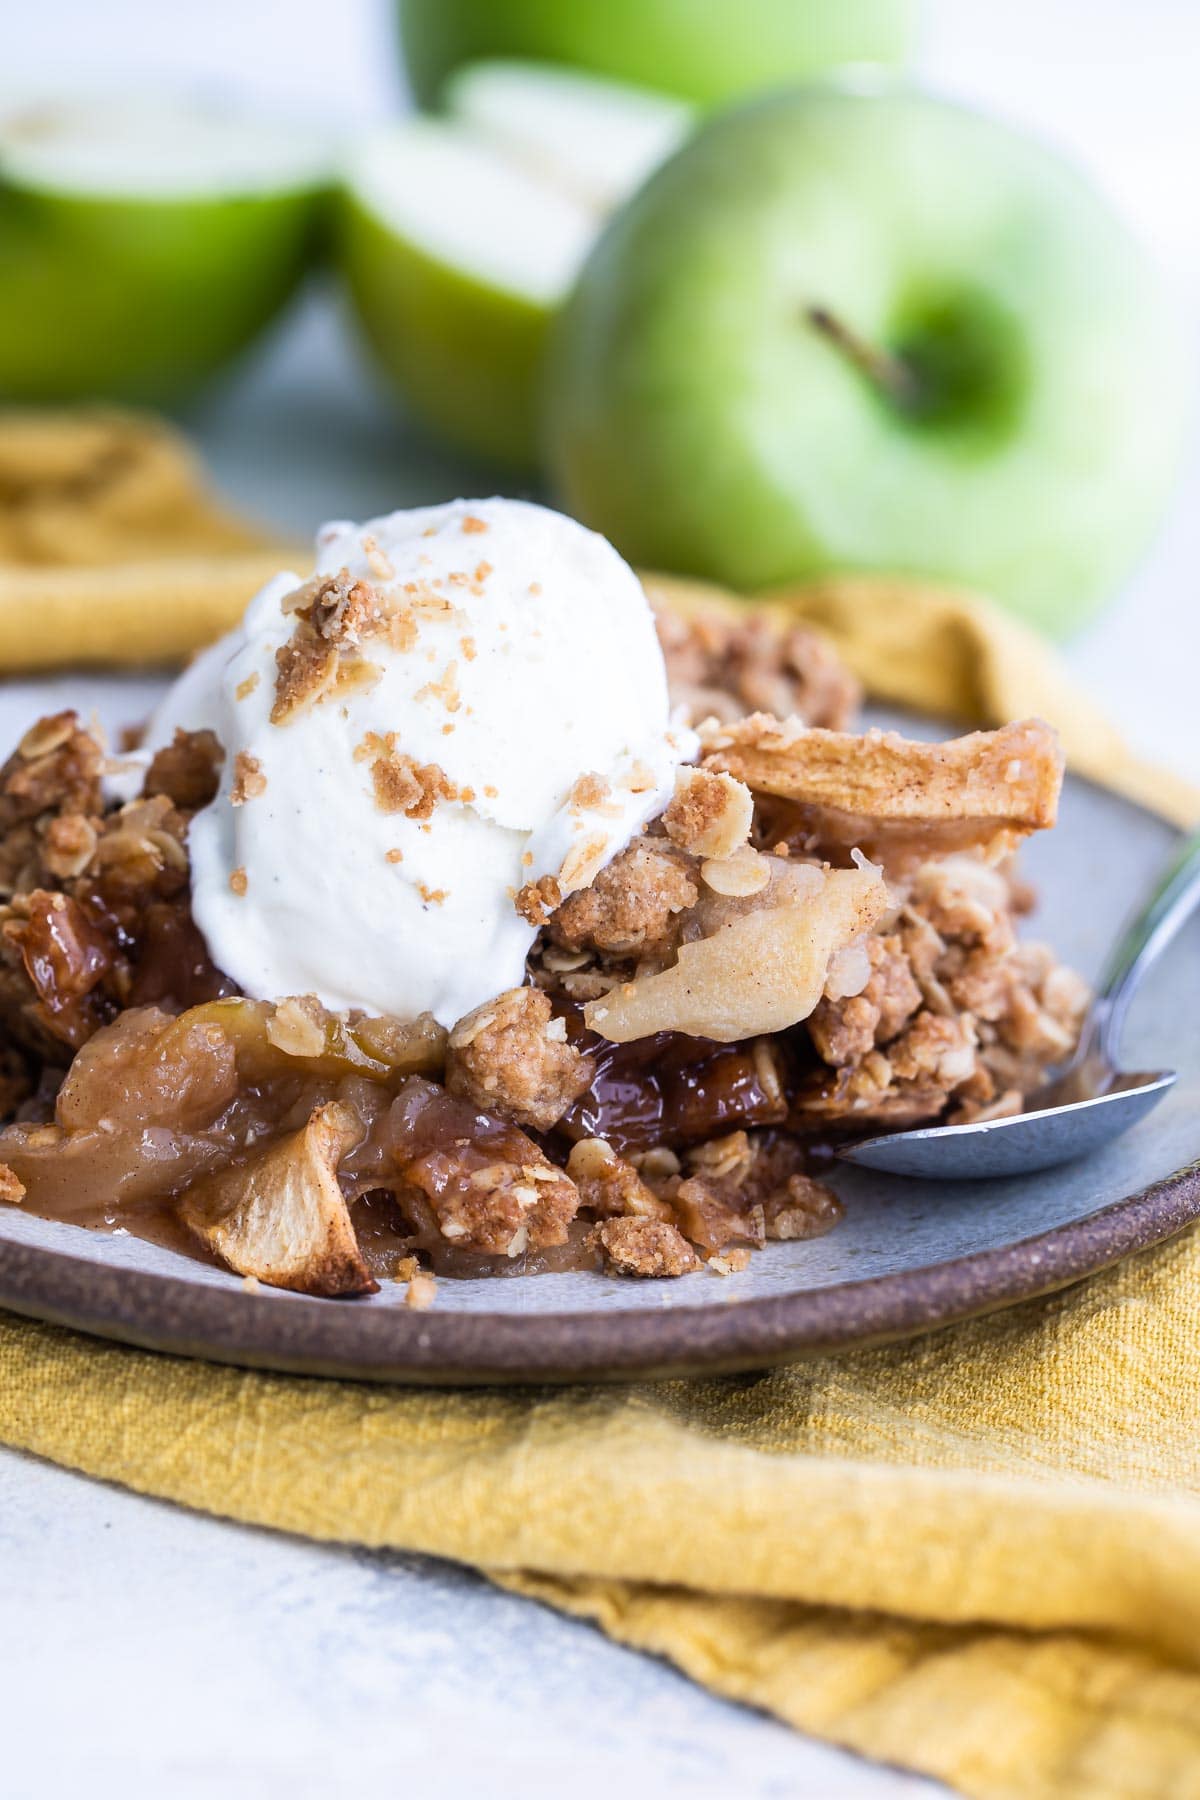 Apple crisp on a plate with a scoop of ice cream on top.